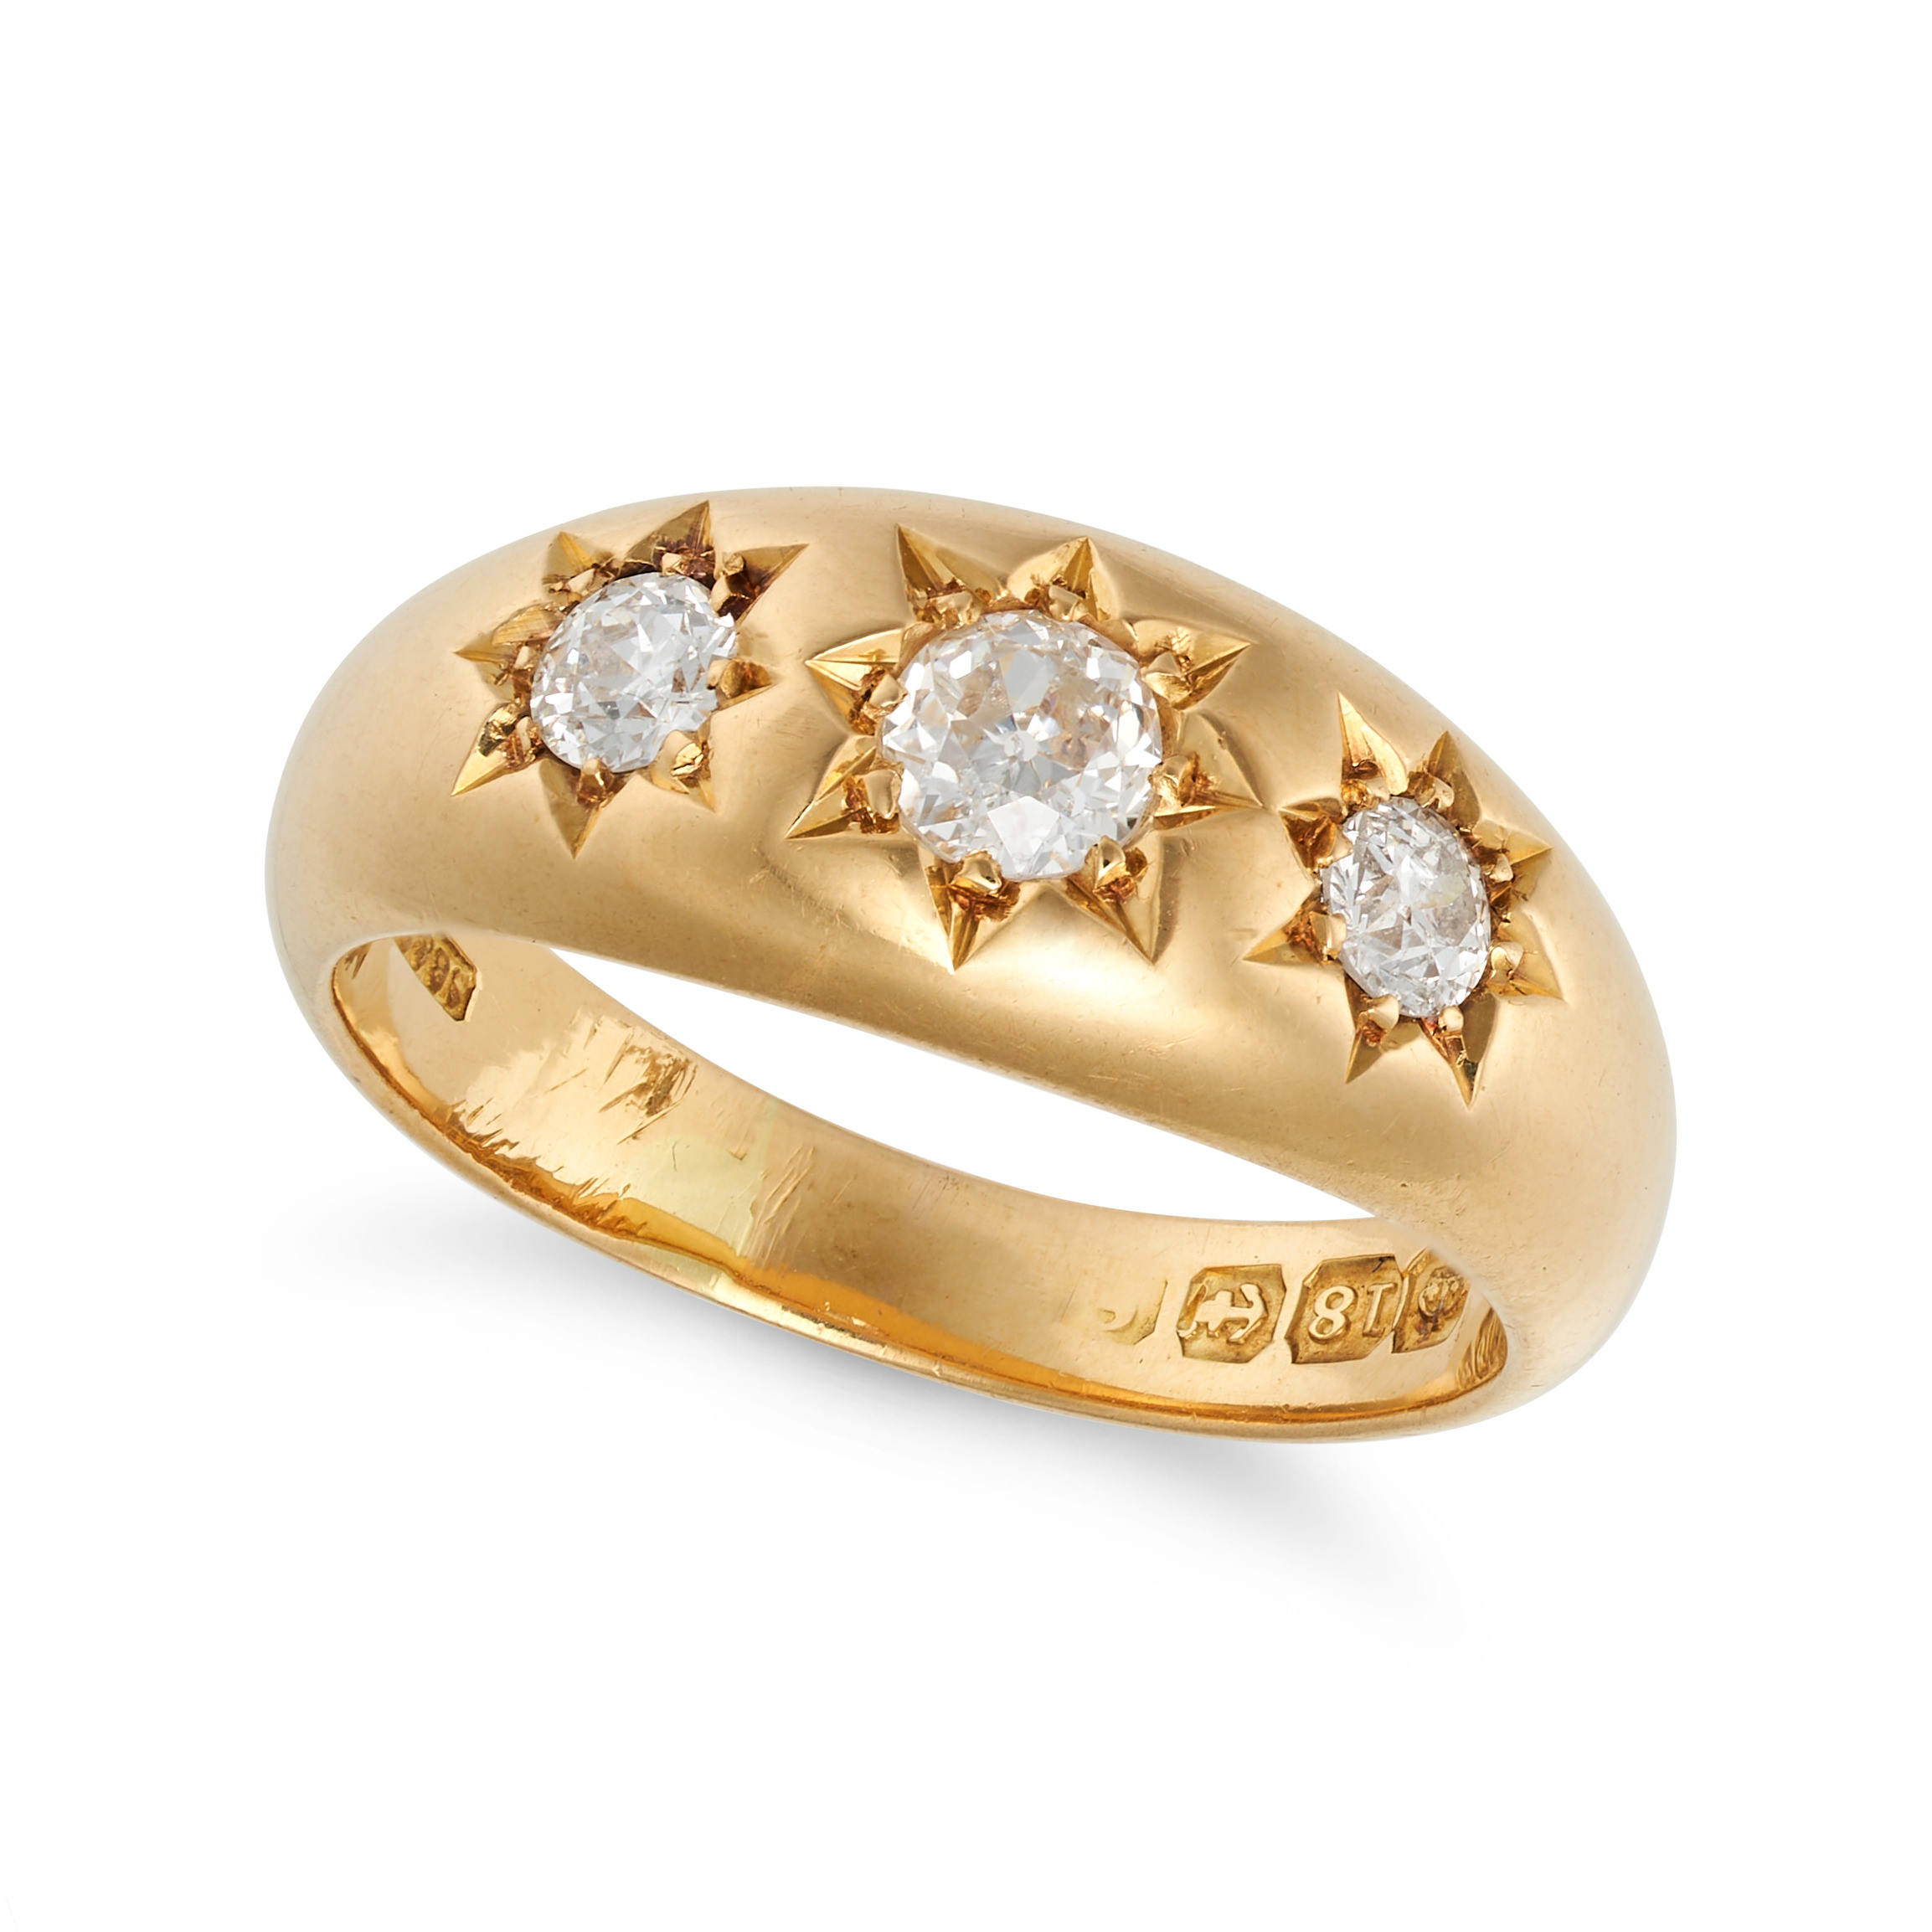 A DIAMOND GYPSY RING in 18ct yellow gold, set with three old European cut diamonds in star motifs...